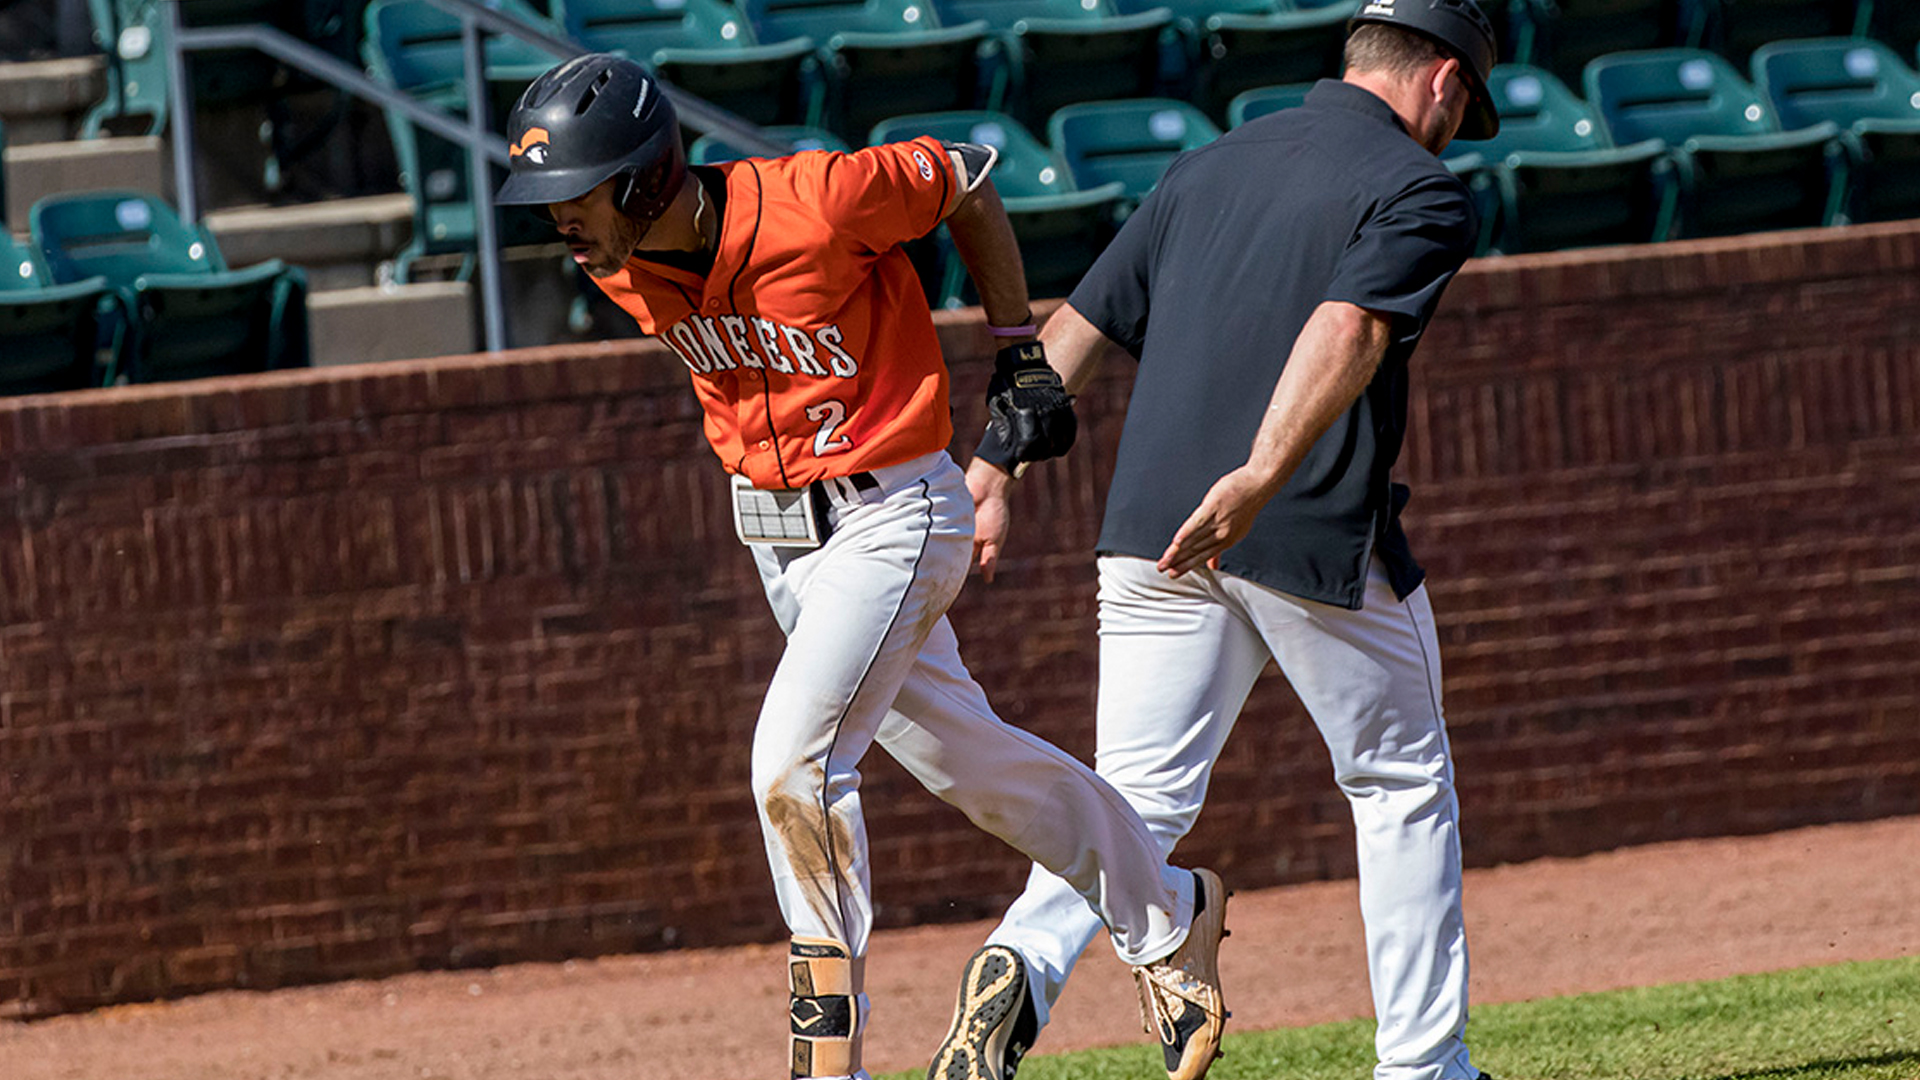 Tusculum uses 10-run inning in 13-4 rout of Mars Hill